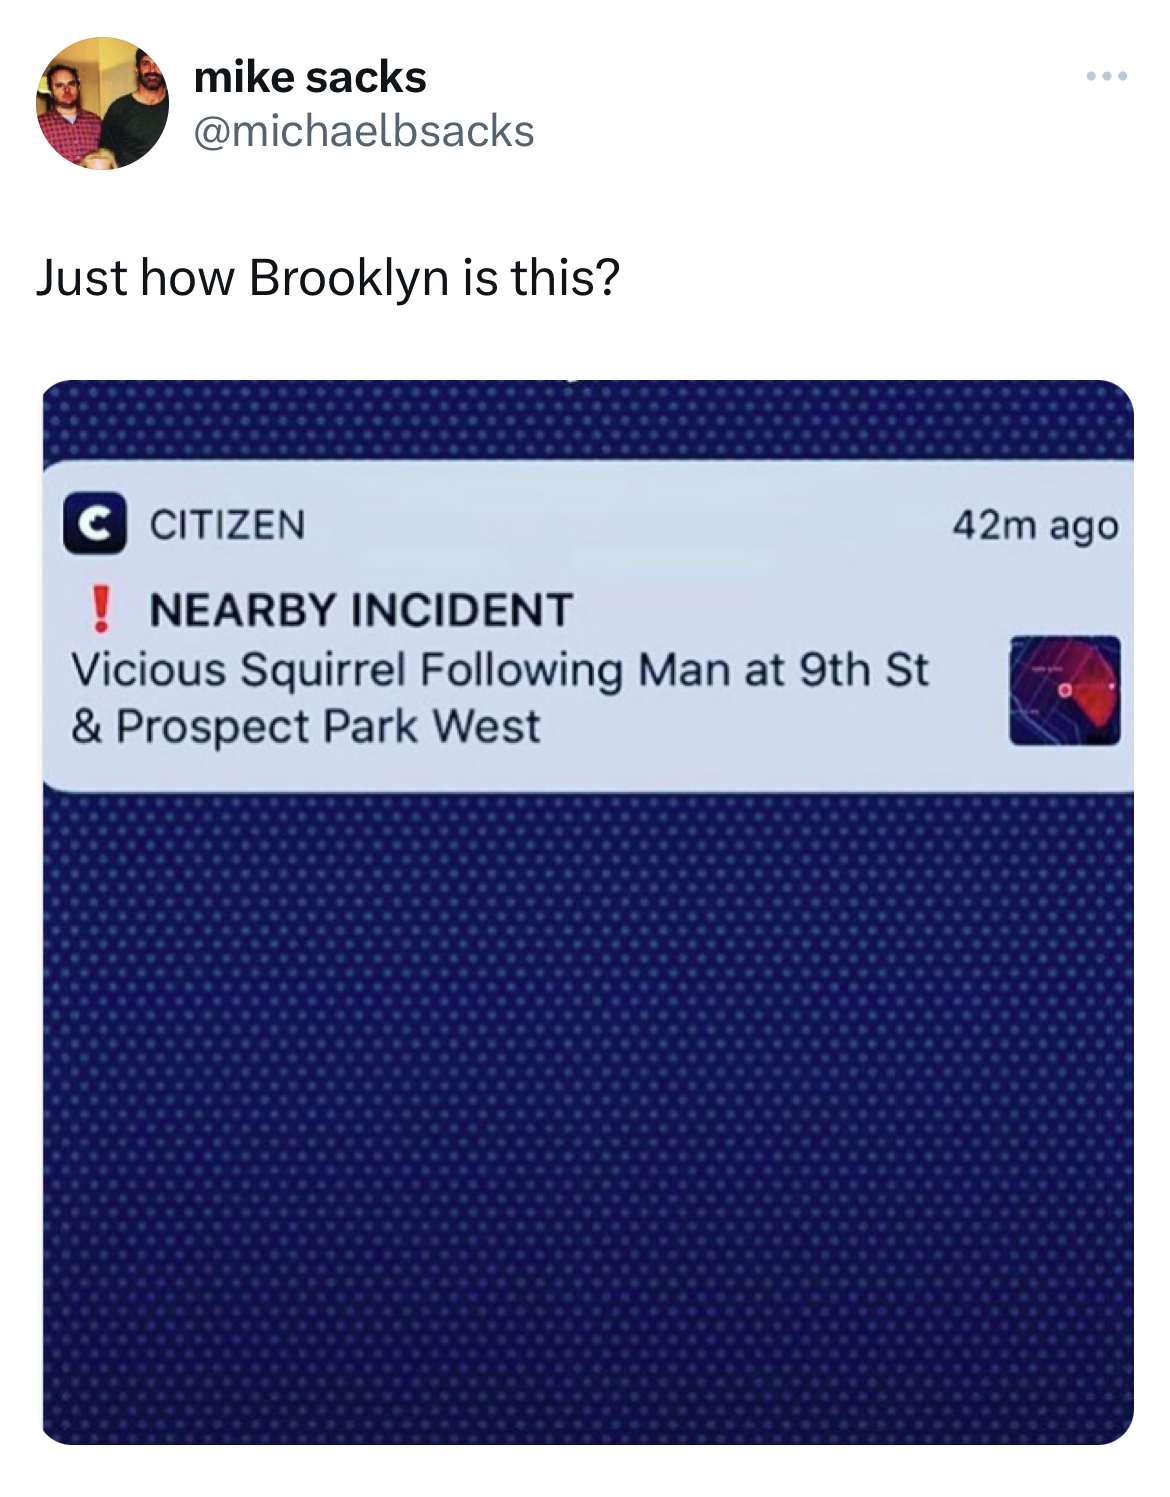 hall of fame tweets -multimedia - mike sacks Just how Brooklyn is this? Citizen ! Nearby Incident Vicious Squirrel ing Man at 9th St & Prospect Park West 42m ago